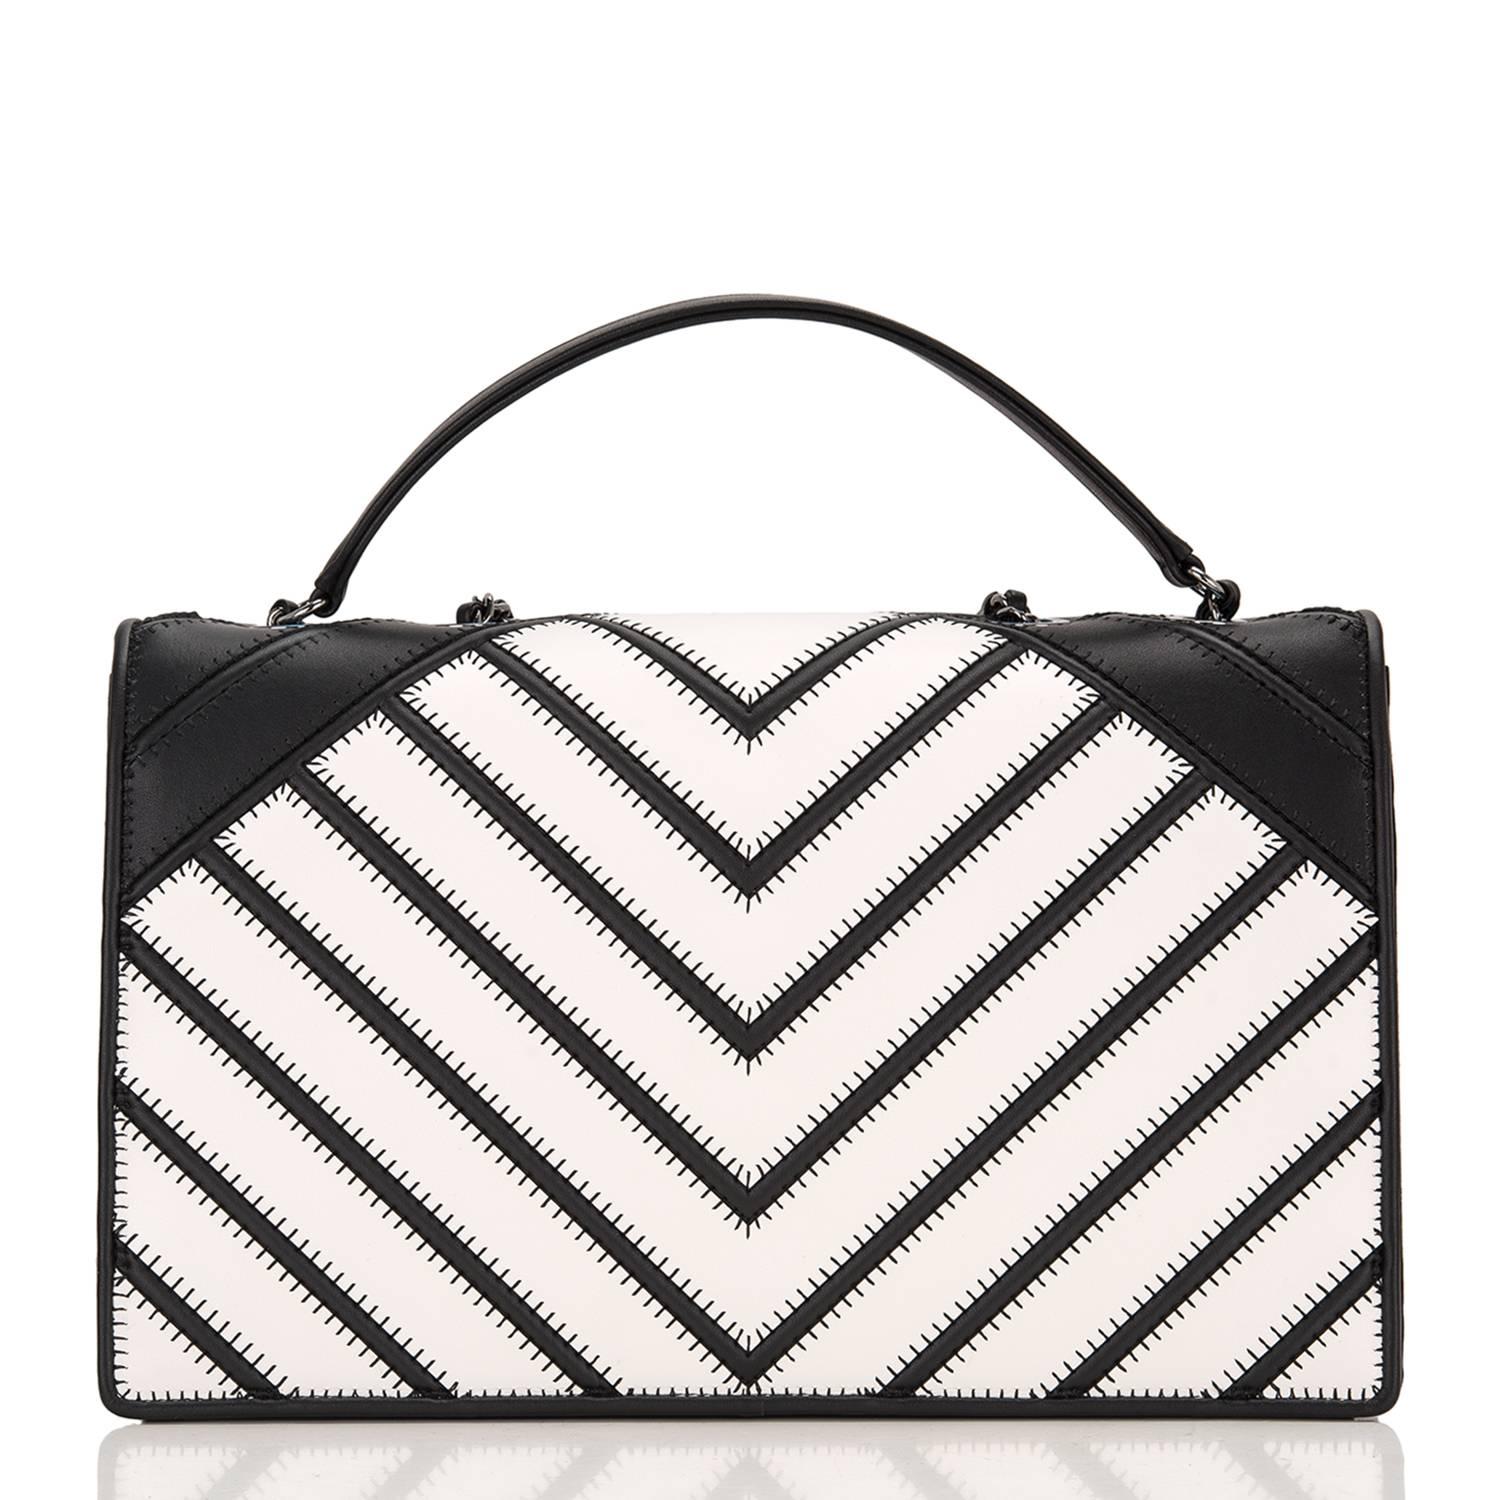 Chanel Black White Chevron Couture Flap Bag In New Condition For Sale In New York, NY